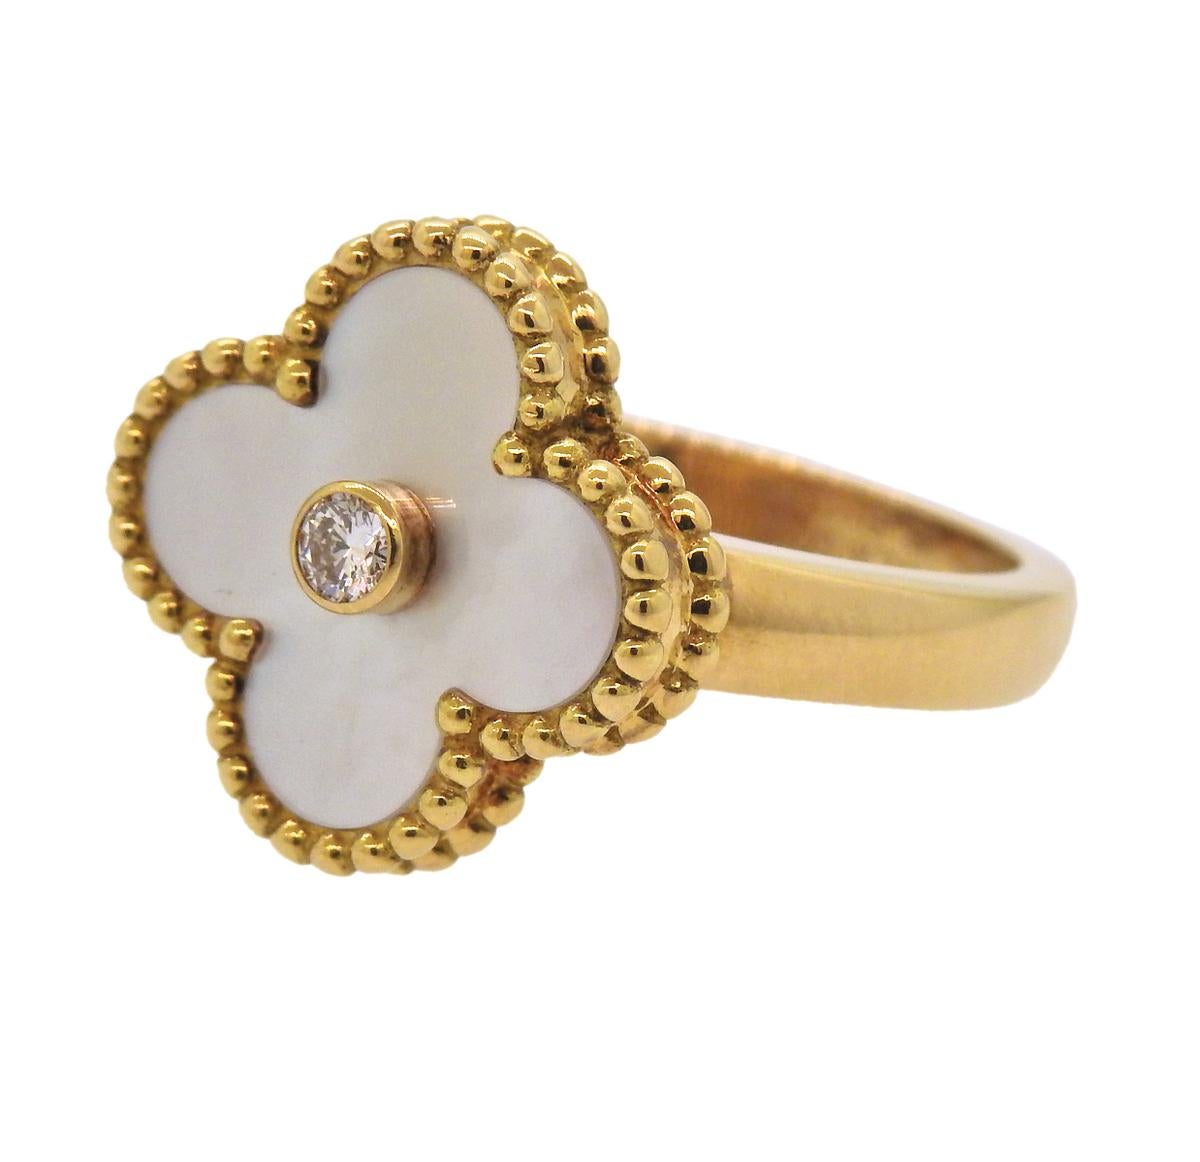  Vintage Alhambra ring, crafted by  Van Cleef & Arpels, set with 0.06ct VVS/FG diamond and mother of pearl top. Ring size - 4.75, ring top - 15mm x 15mm, weighs 6.4 grams. Marked: VCA, G750, 48, JB112***.